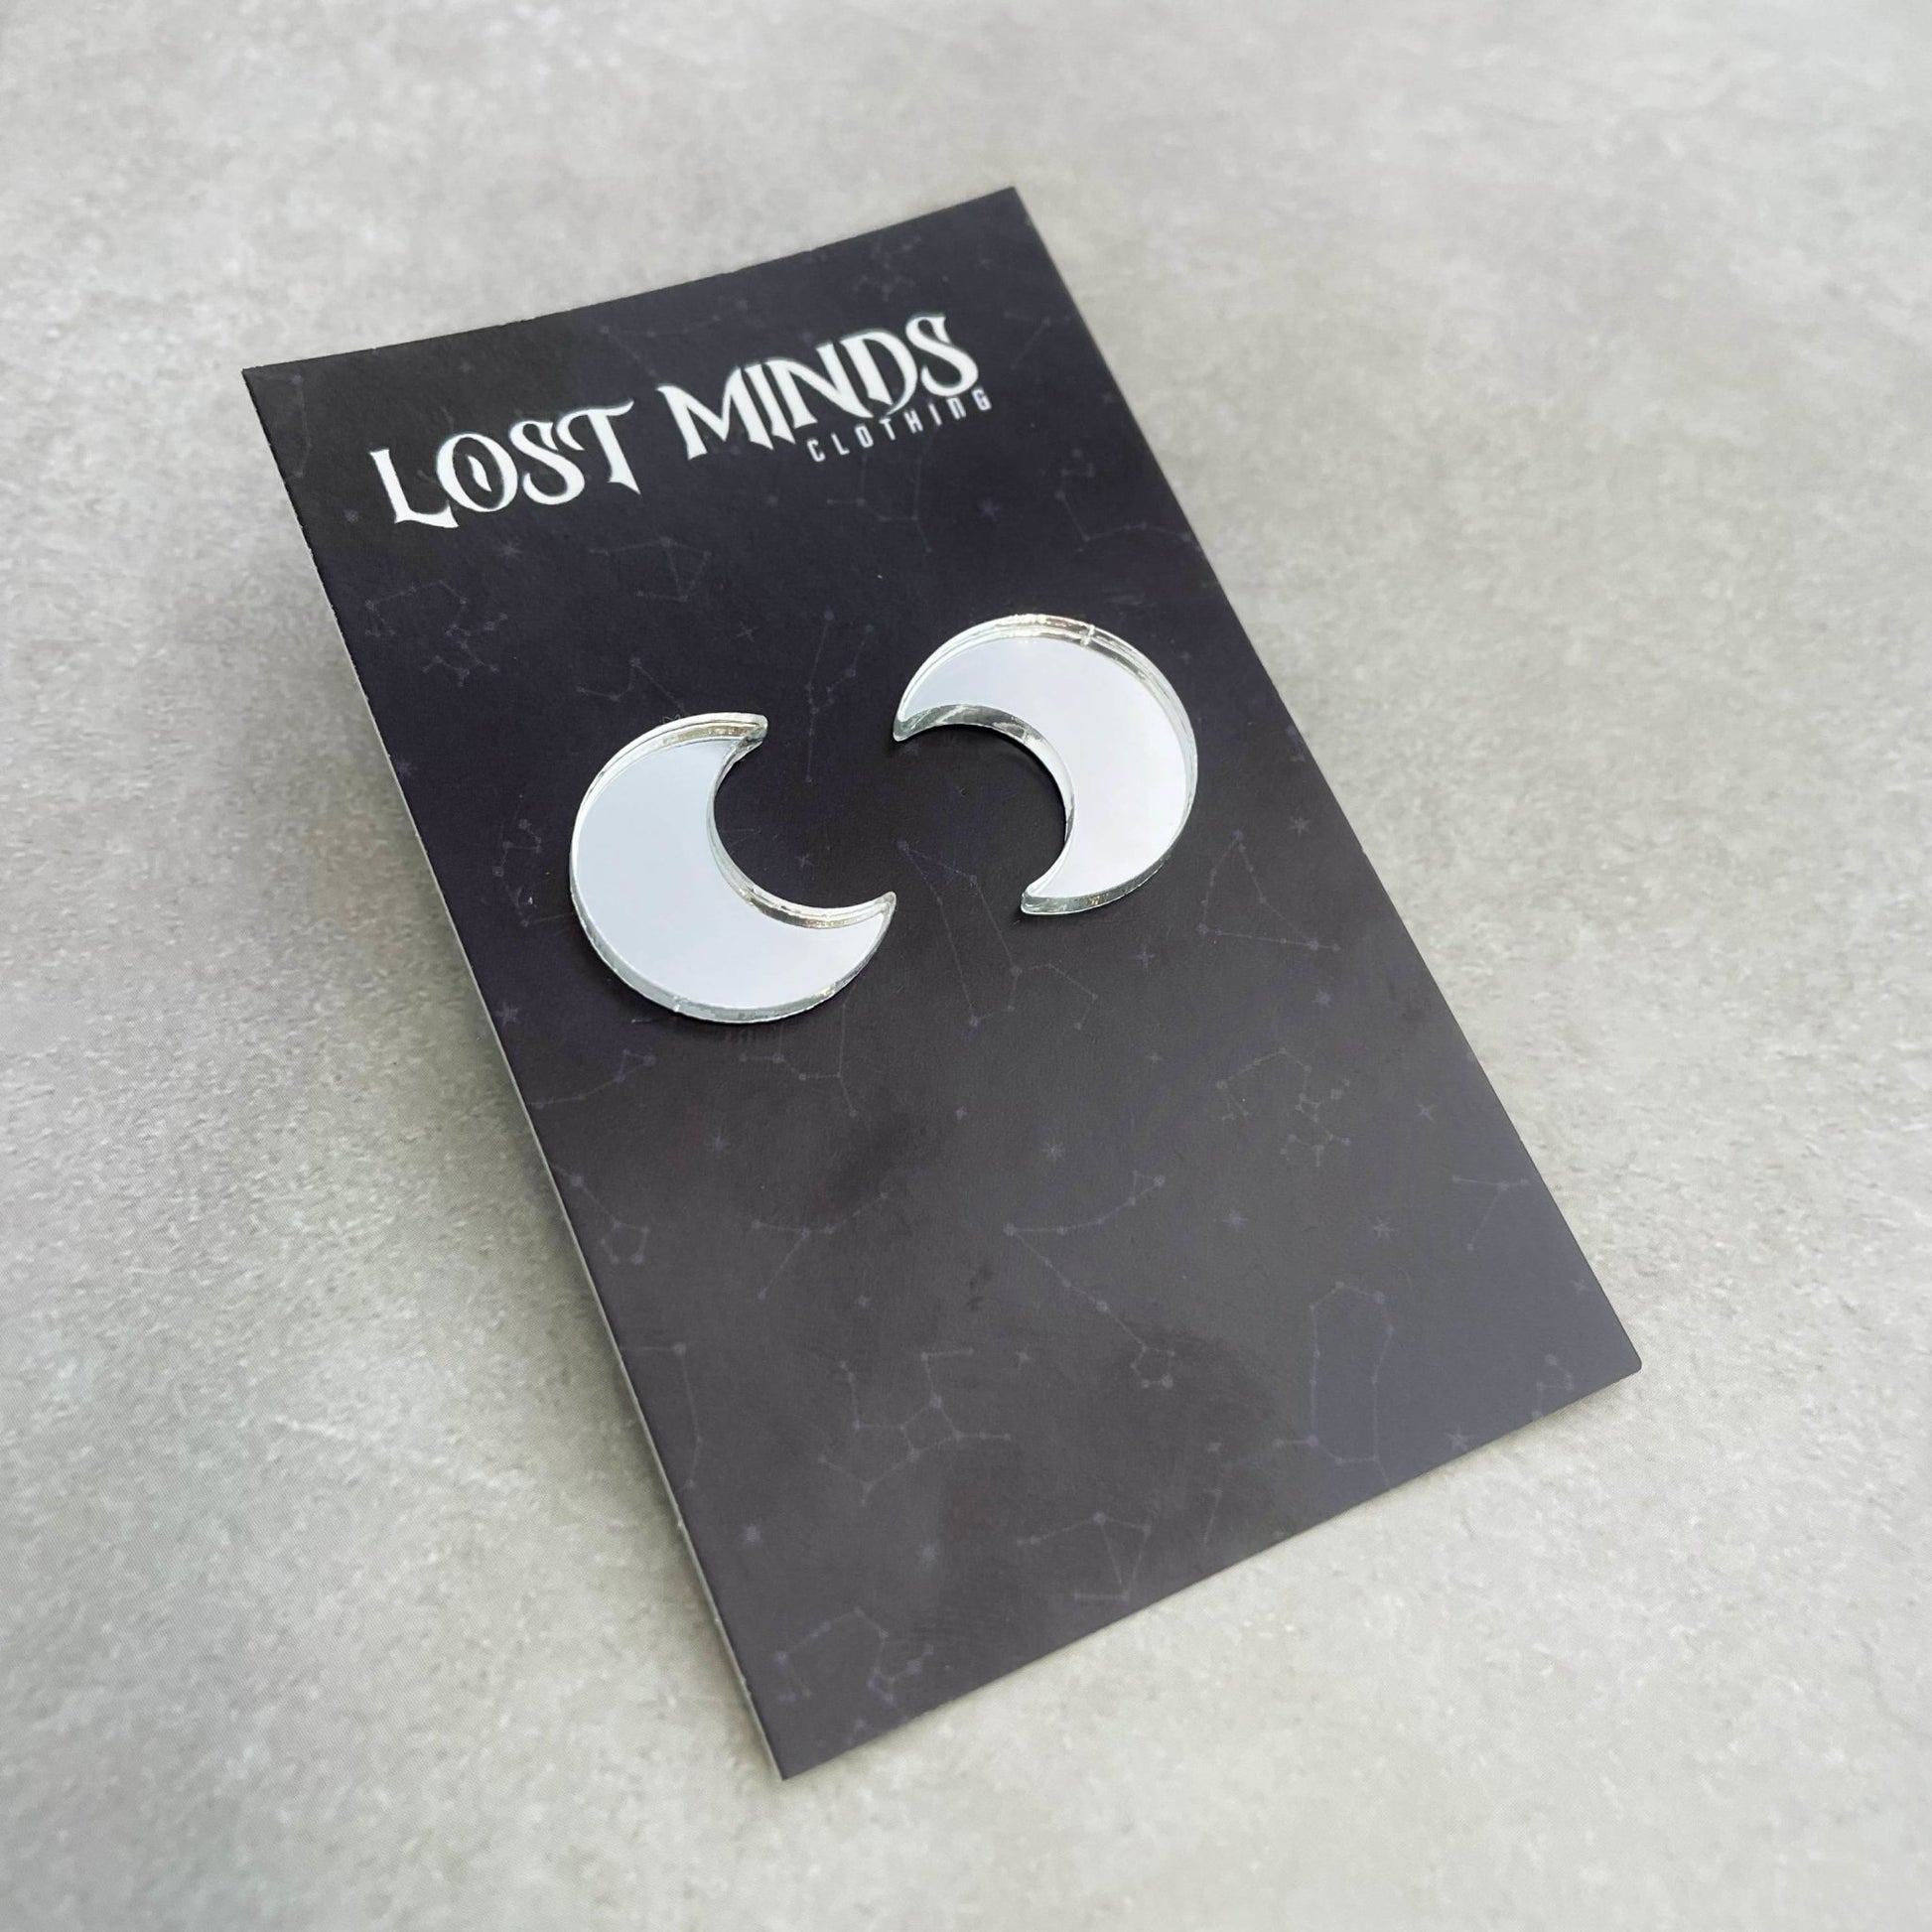 Crescent Moon Essential Studs (4 colours available) - Lost Minds Clothing